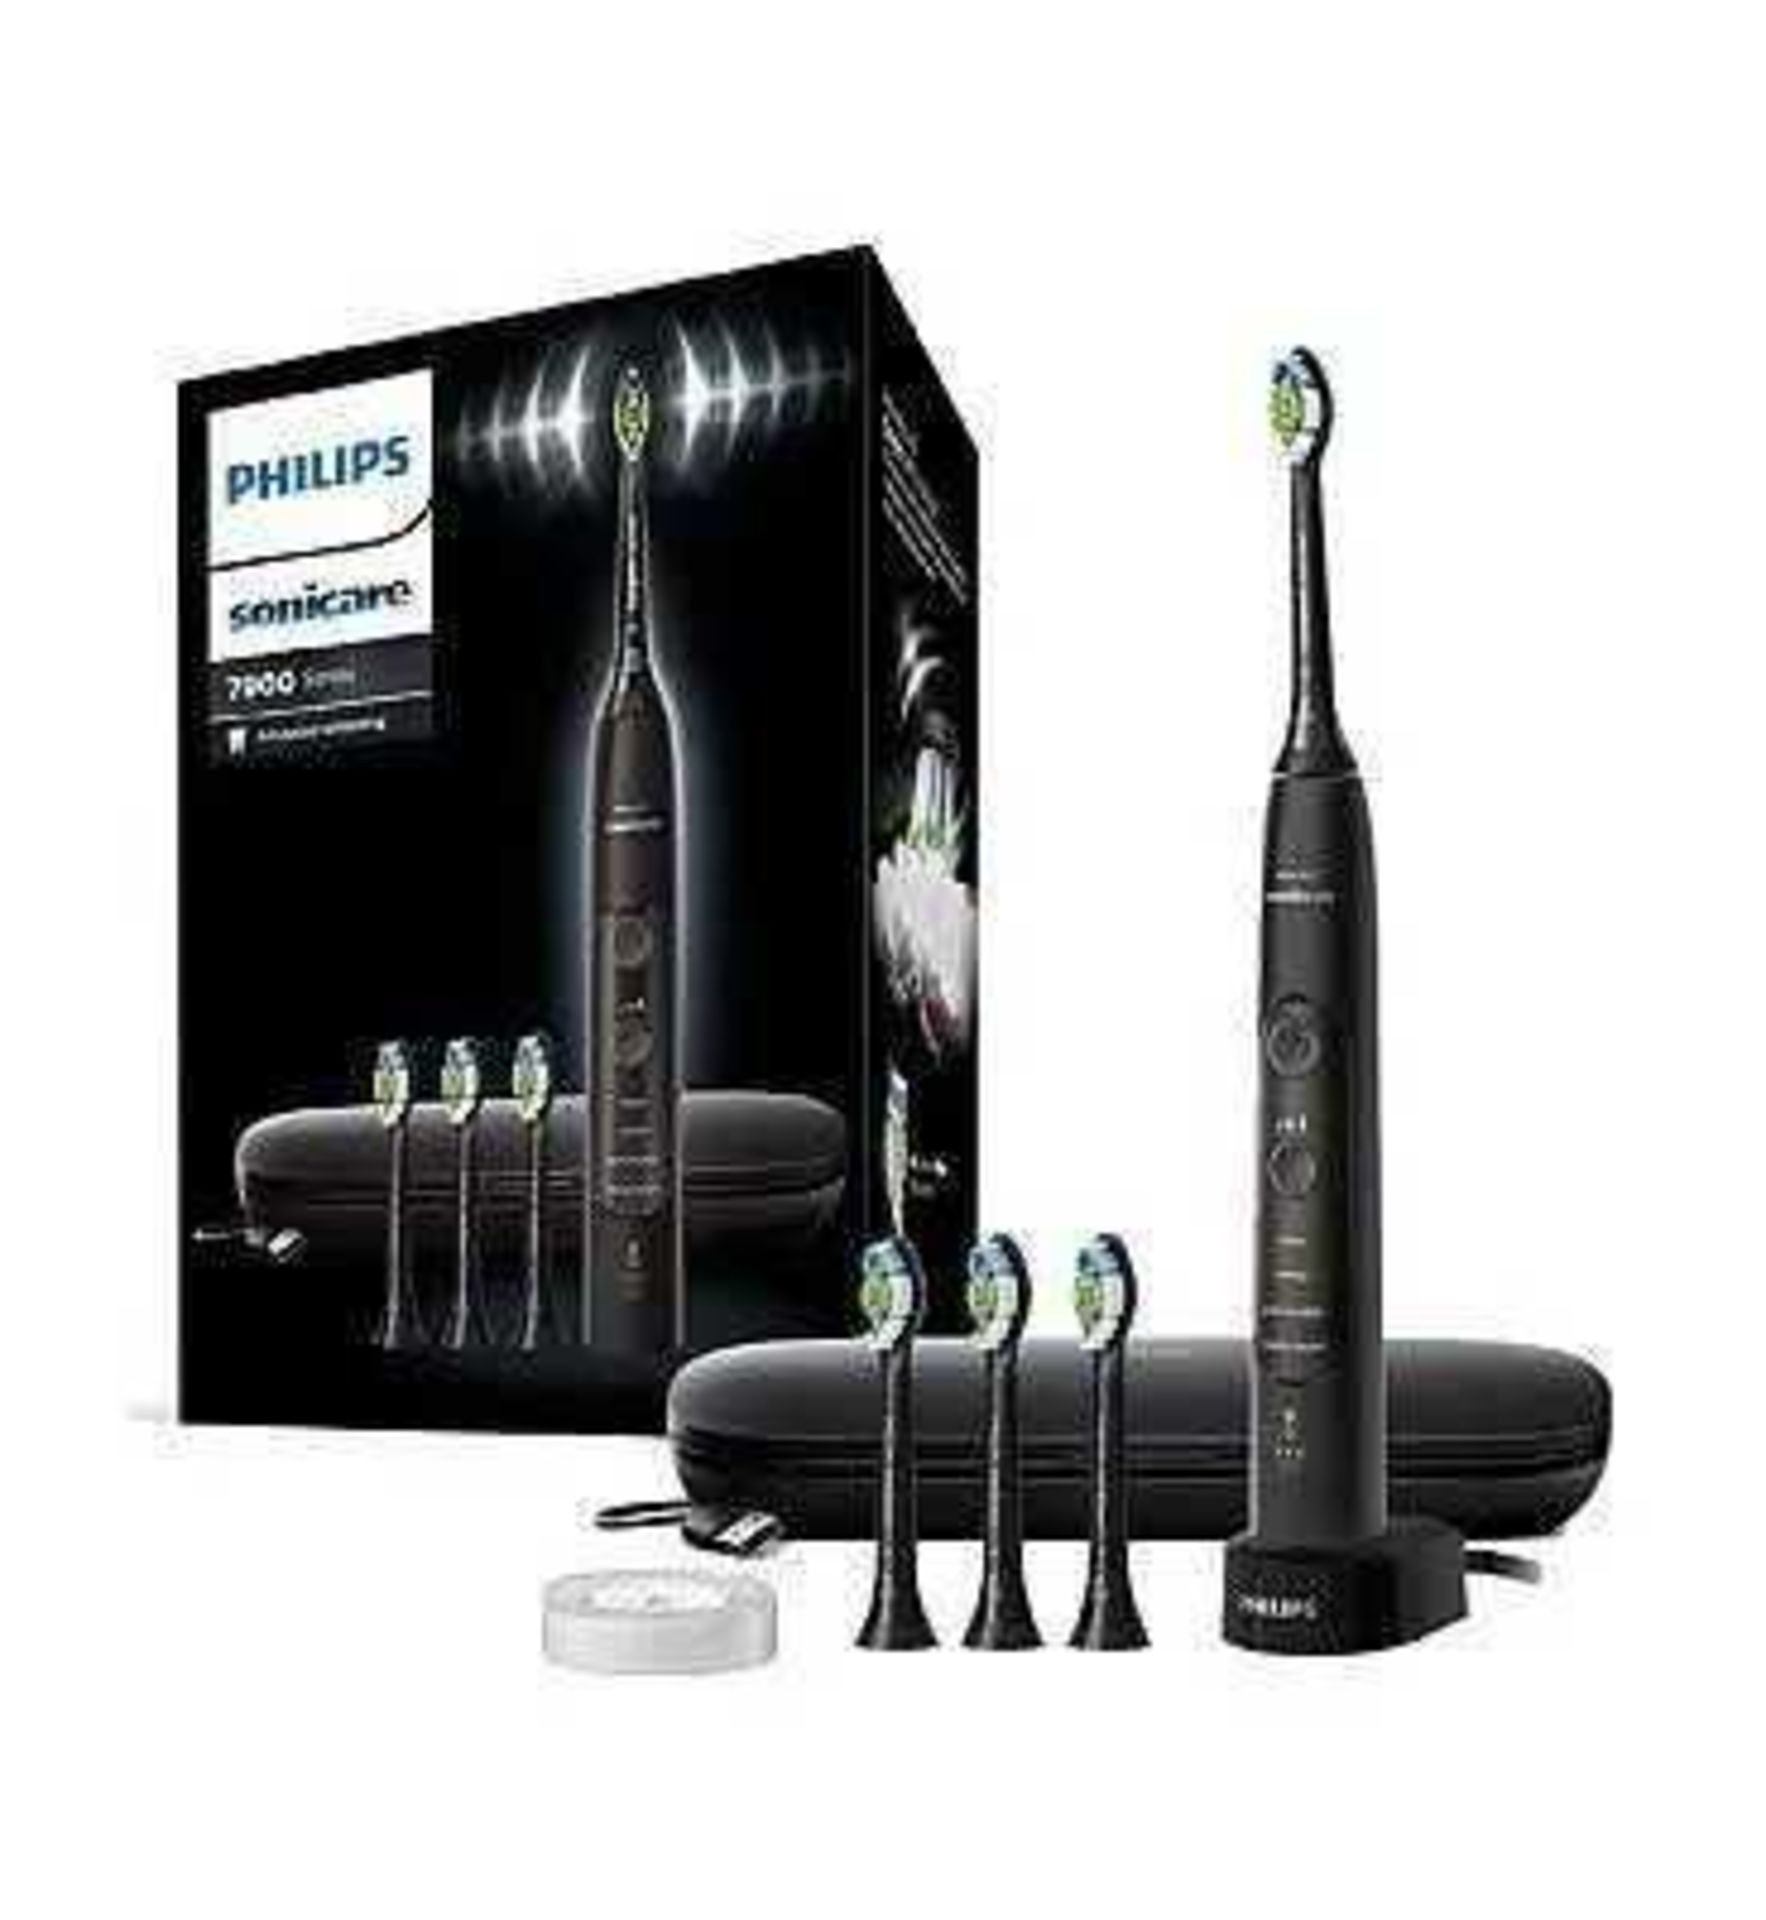 RRP £150 Bagged Philips Sonicare Tooth Brush